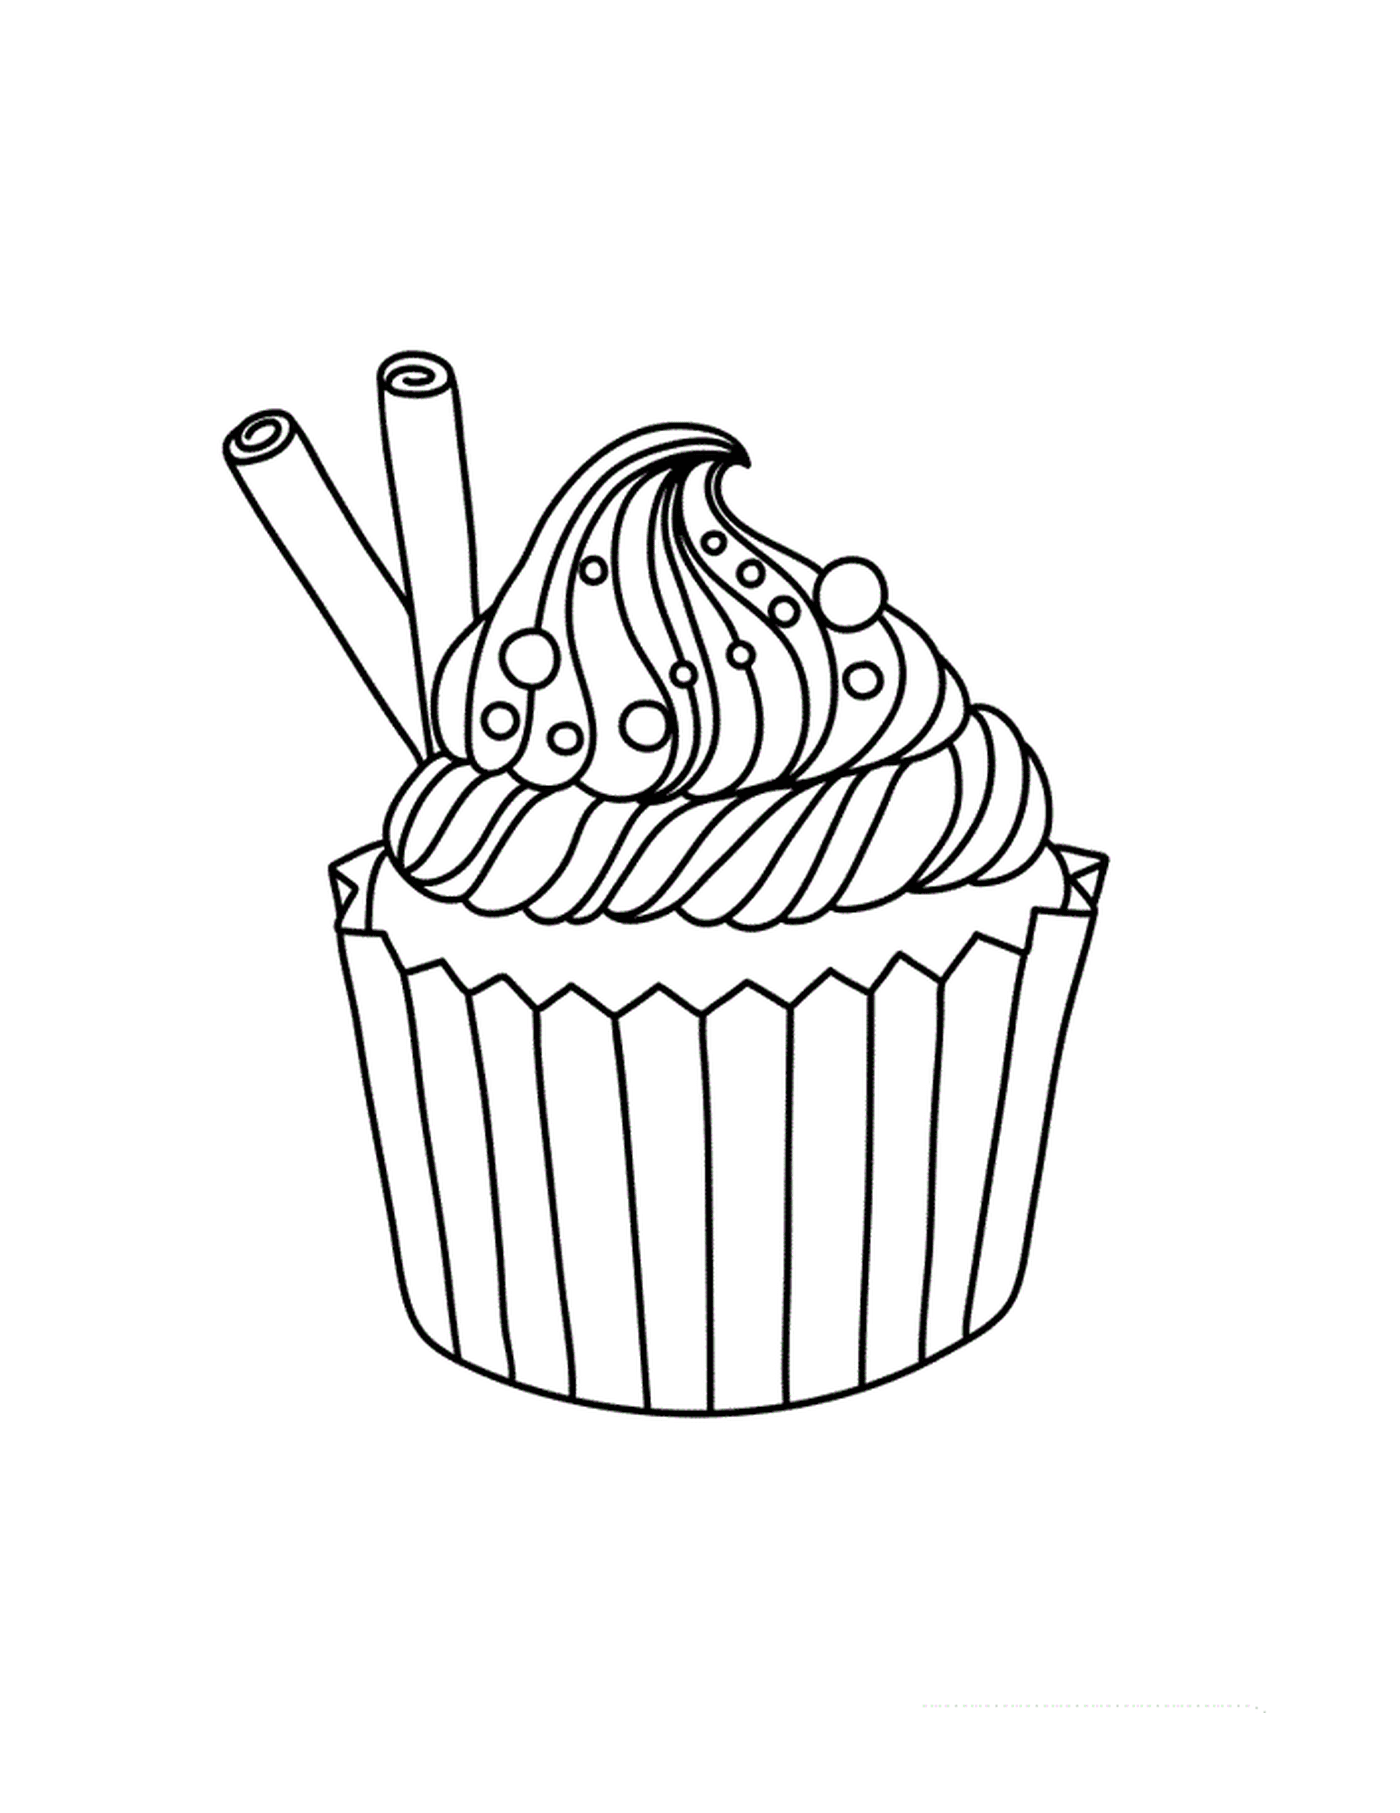  A classic vintage cupcake 